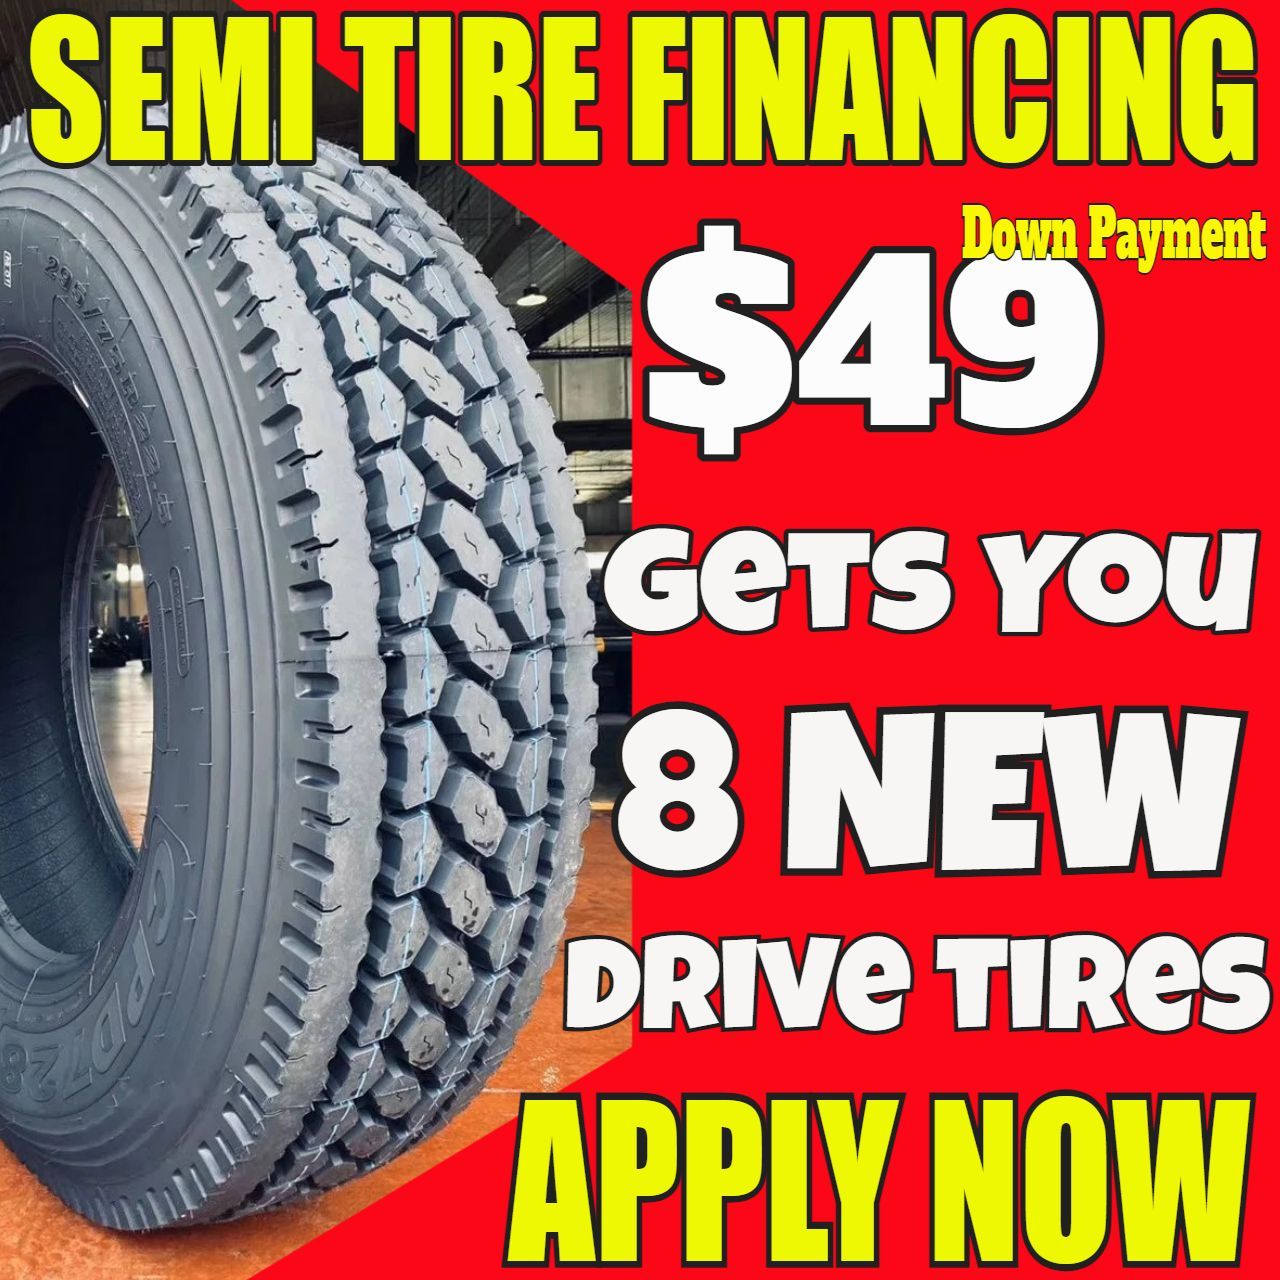 Commercial semi-truck tires in Salem, OR. 18-wheeler Heavy-duty Big-Rig trucking tires at Salem, OR. Cheap tractor-trailer auto vehicle prices in Salem, OR